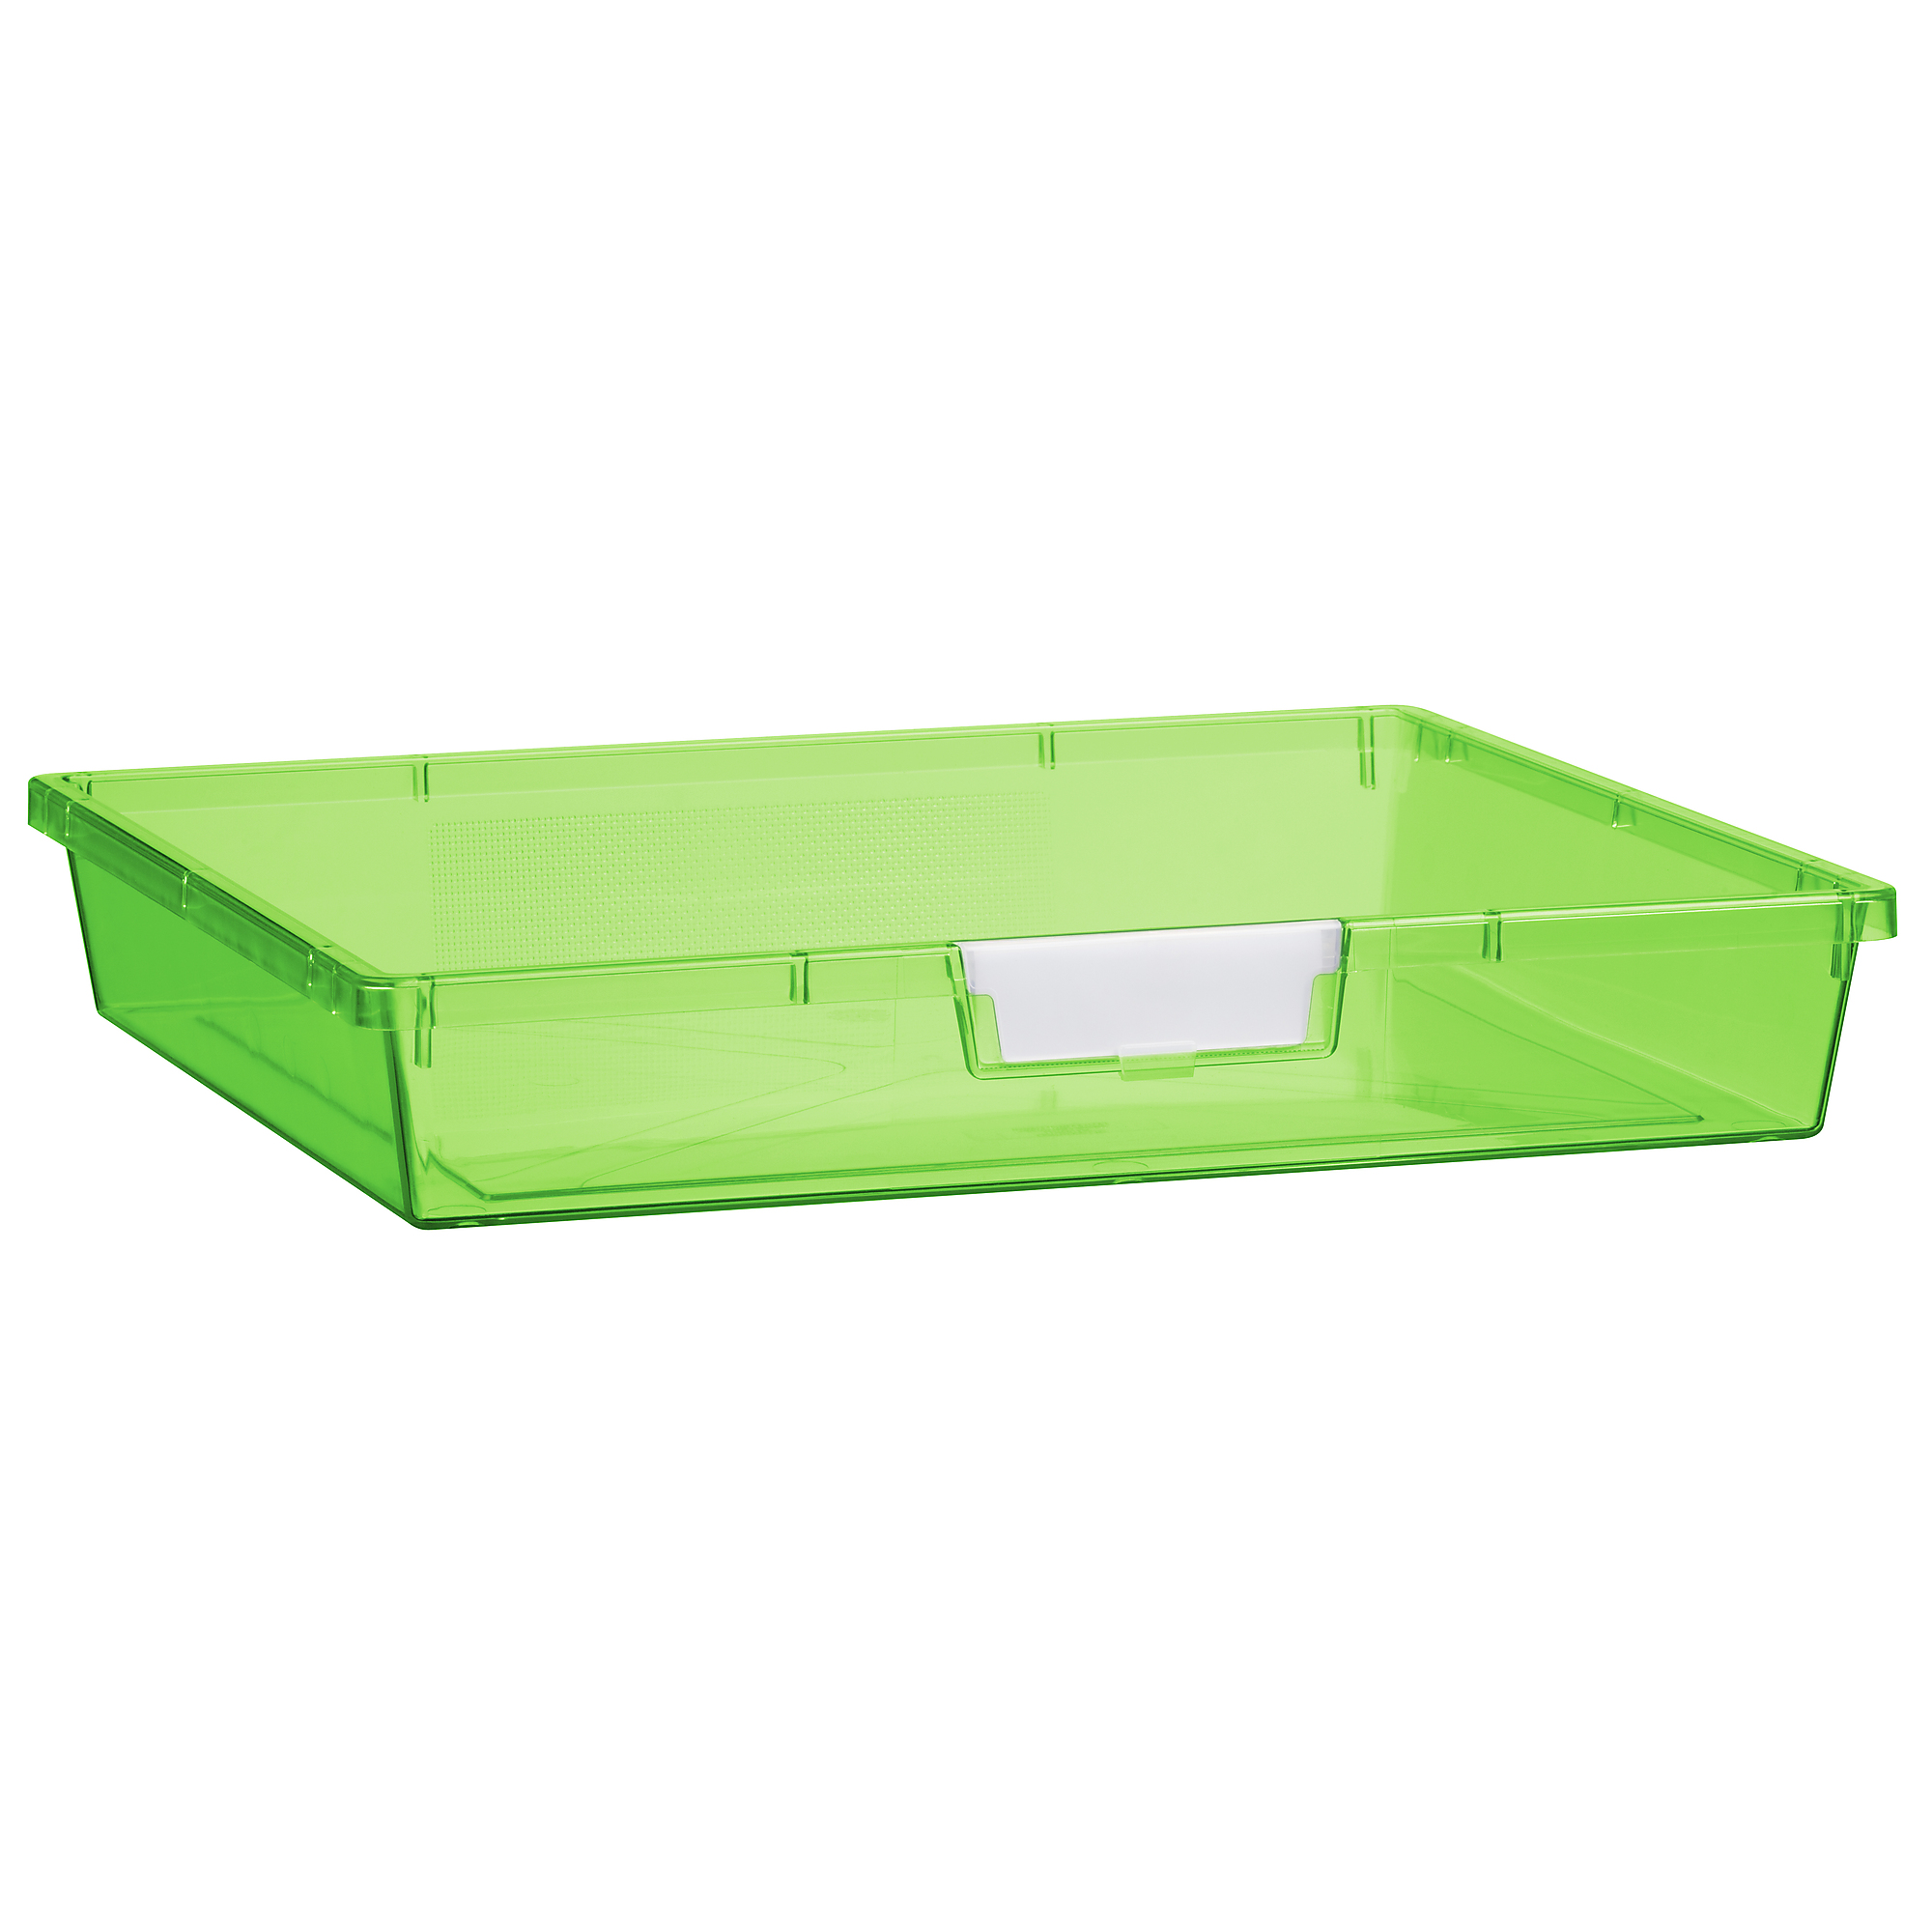 Certwood StorWerks, Wide Line Tray 3Inch in Neon Green - 3 Pack, Included (qty.) 3, Material Plastic, Height 12 in, Model CE1956FG3